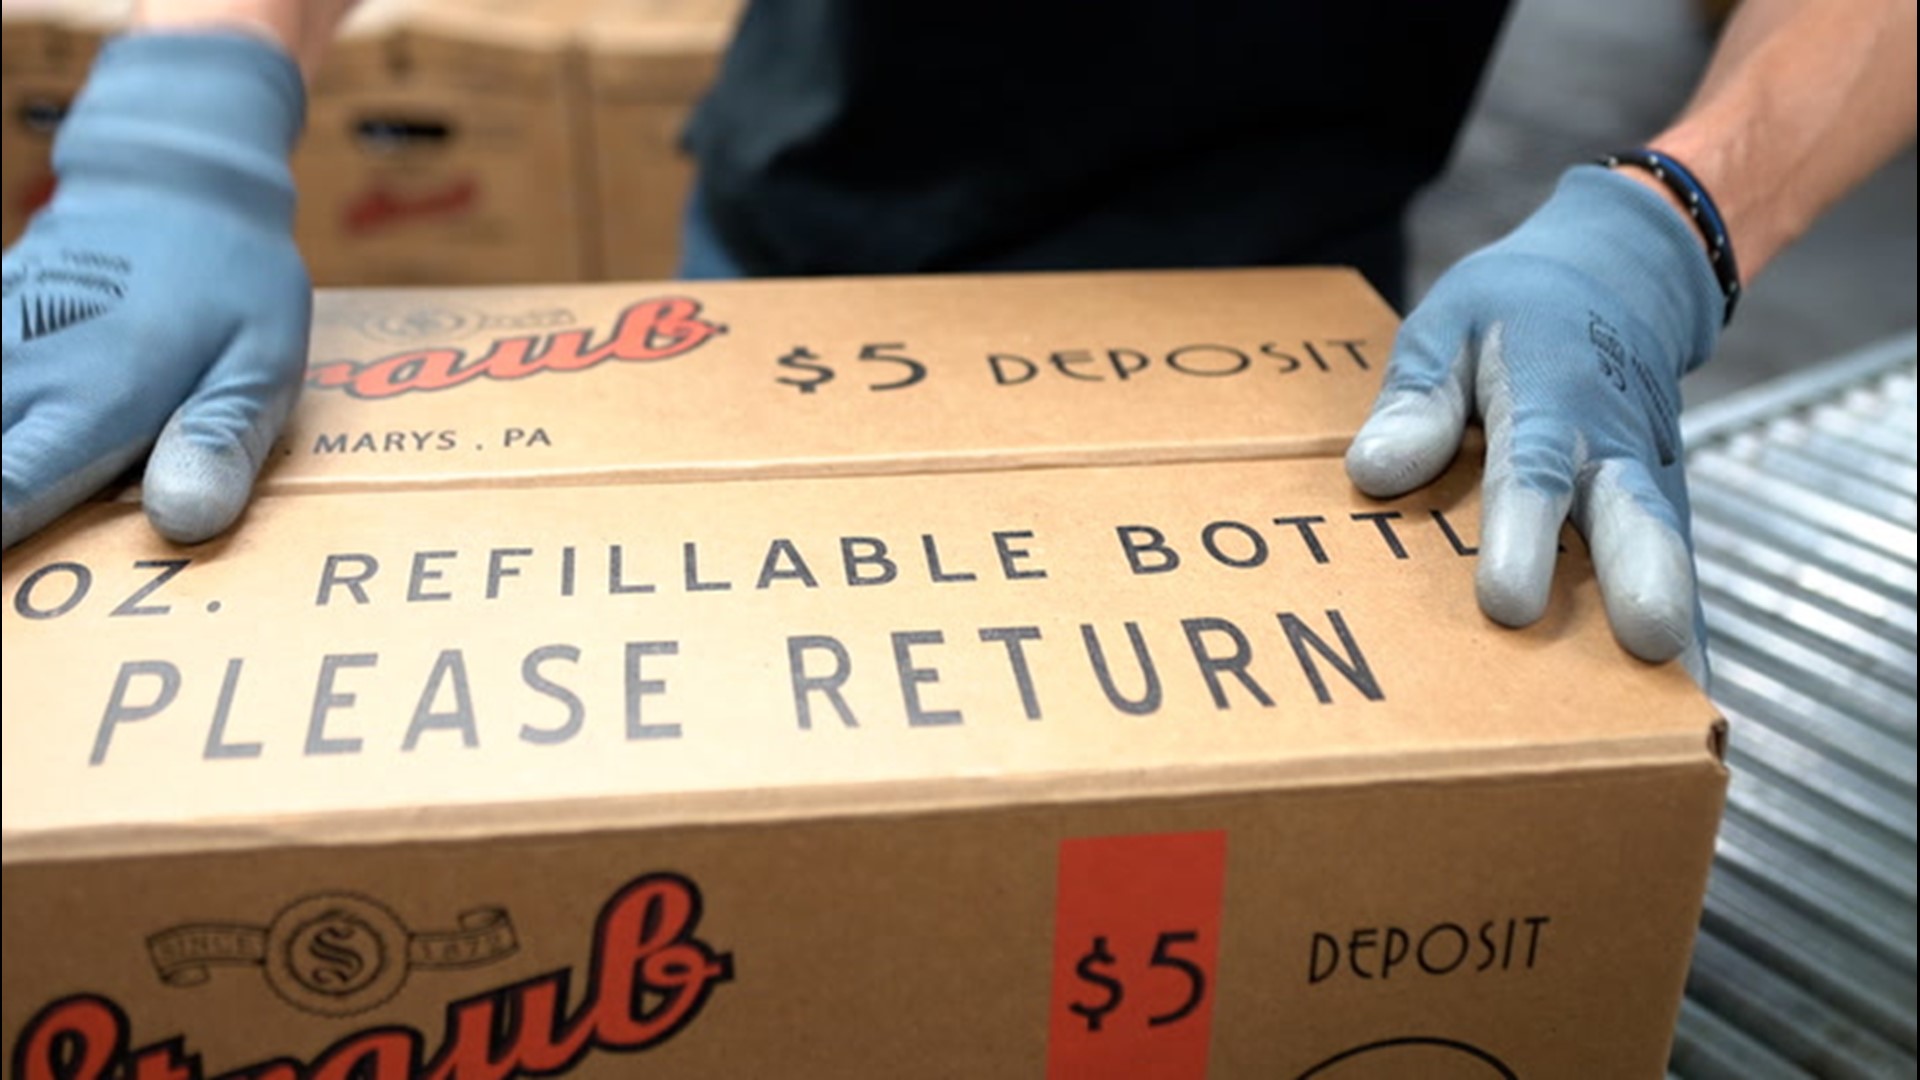 Straub Brewing, located in western Pennsylvania, is the last brewery in the United States that still offers a returnable beer bottle program.